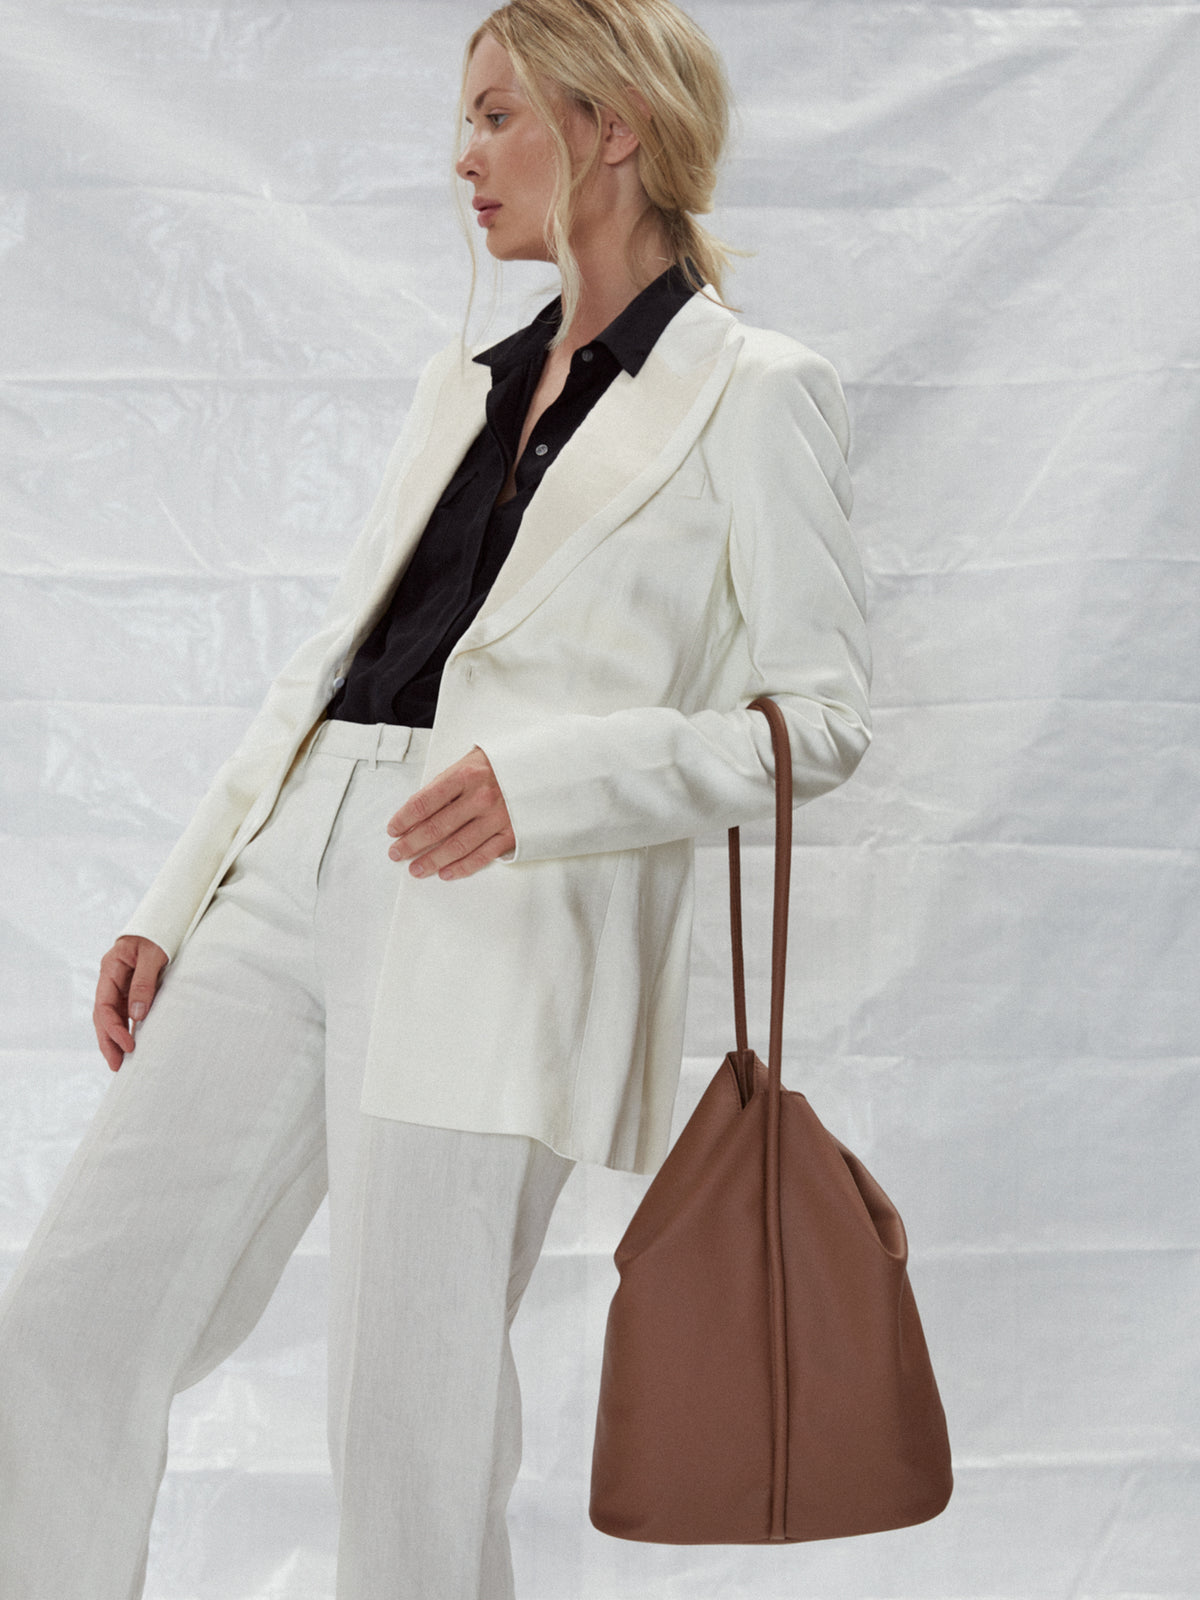 Are Studio Louise Bag in Saddle at General Store